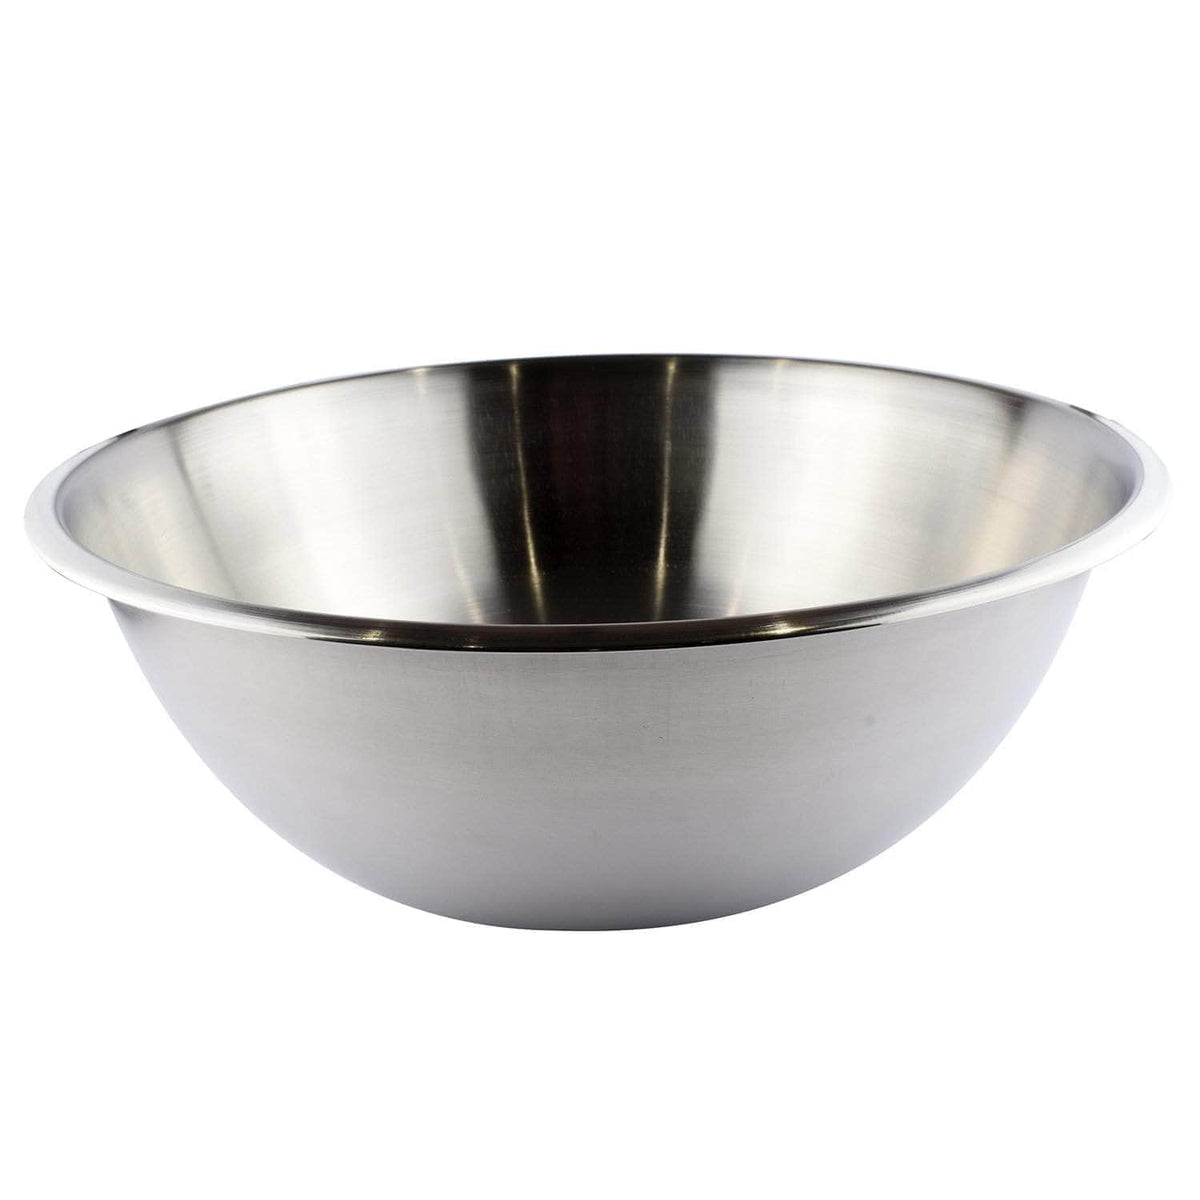 Stainless steel mixing bowl 6.6 Litres